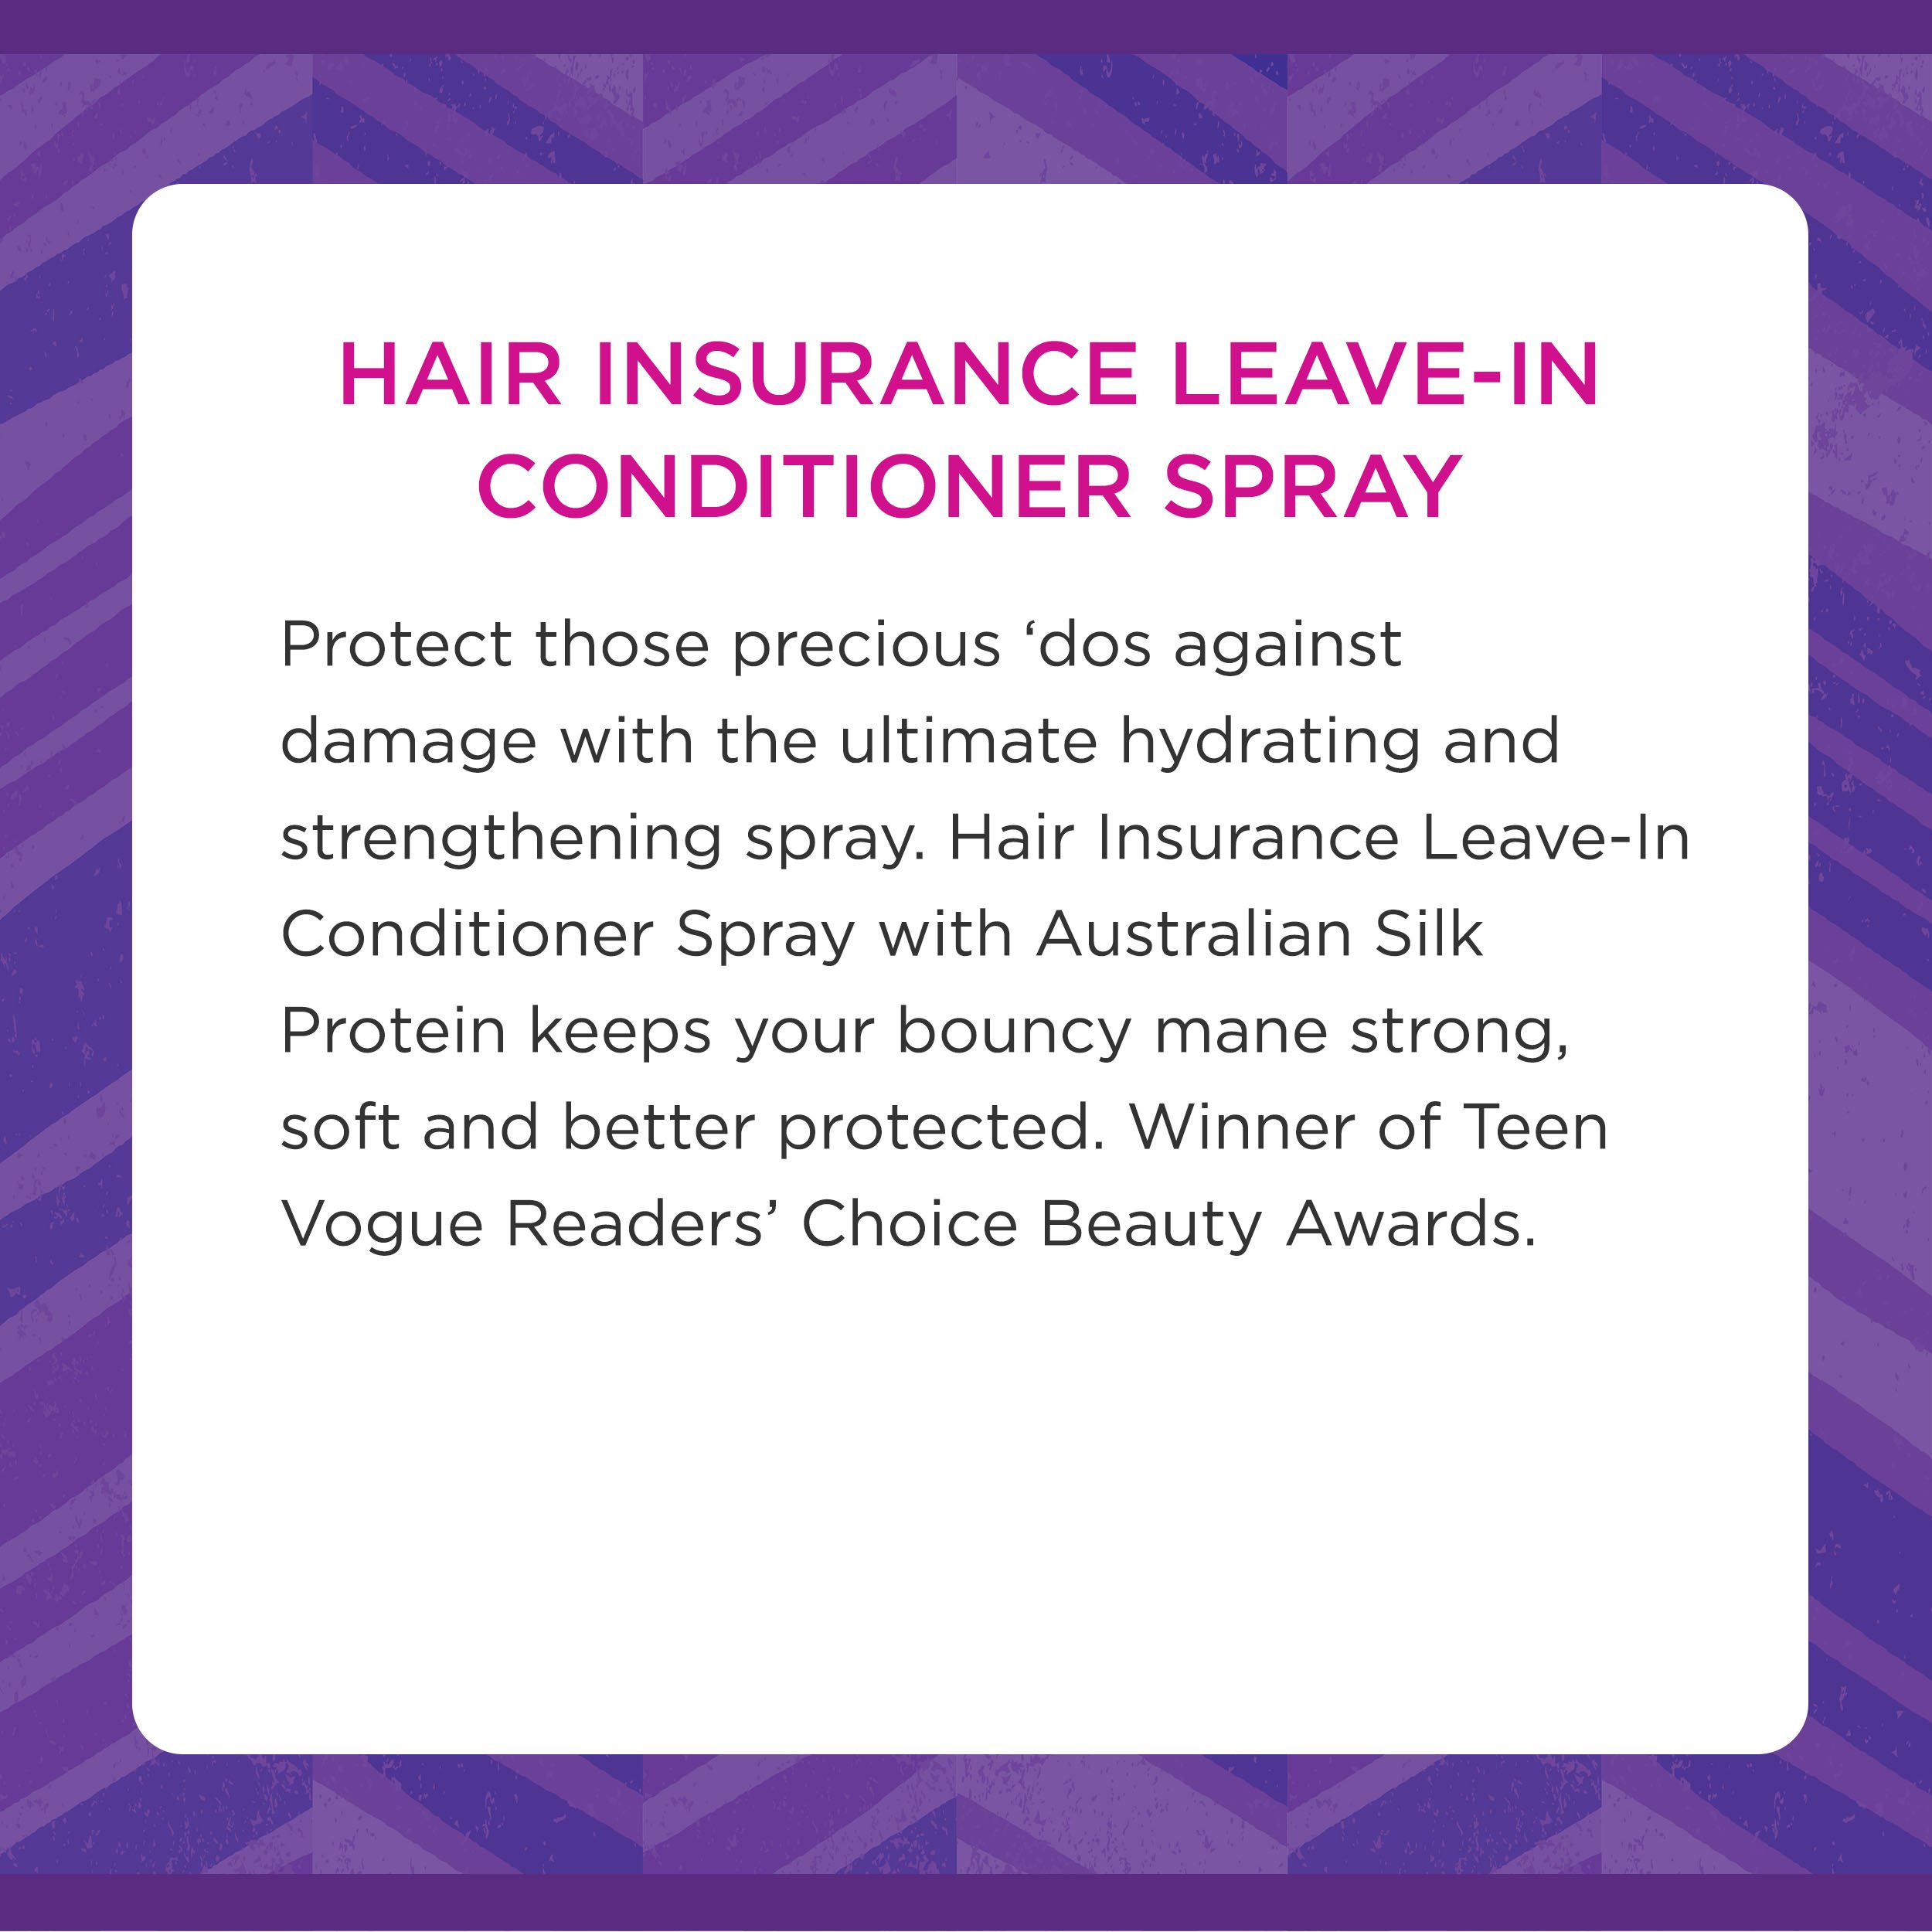 Aussie Hair Insurance Leave-In Conditioner 8 Fluid Ounce